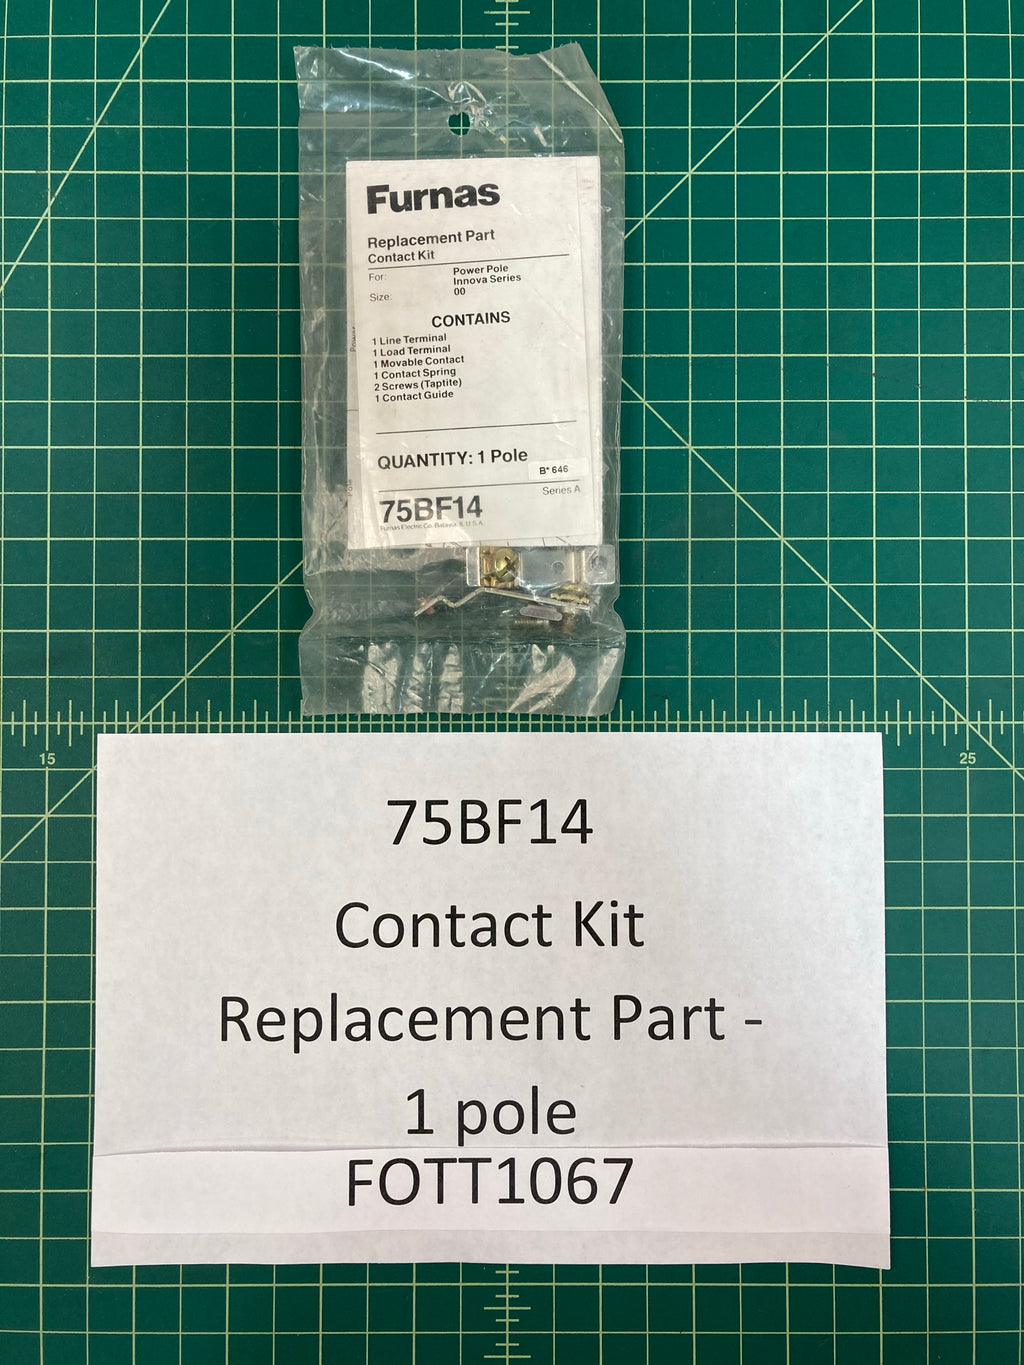 Furnas Contact Kit Replacement Part - 1 pole 75BF14